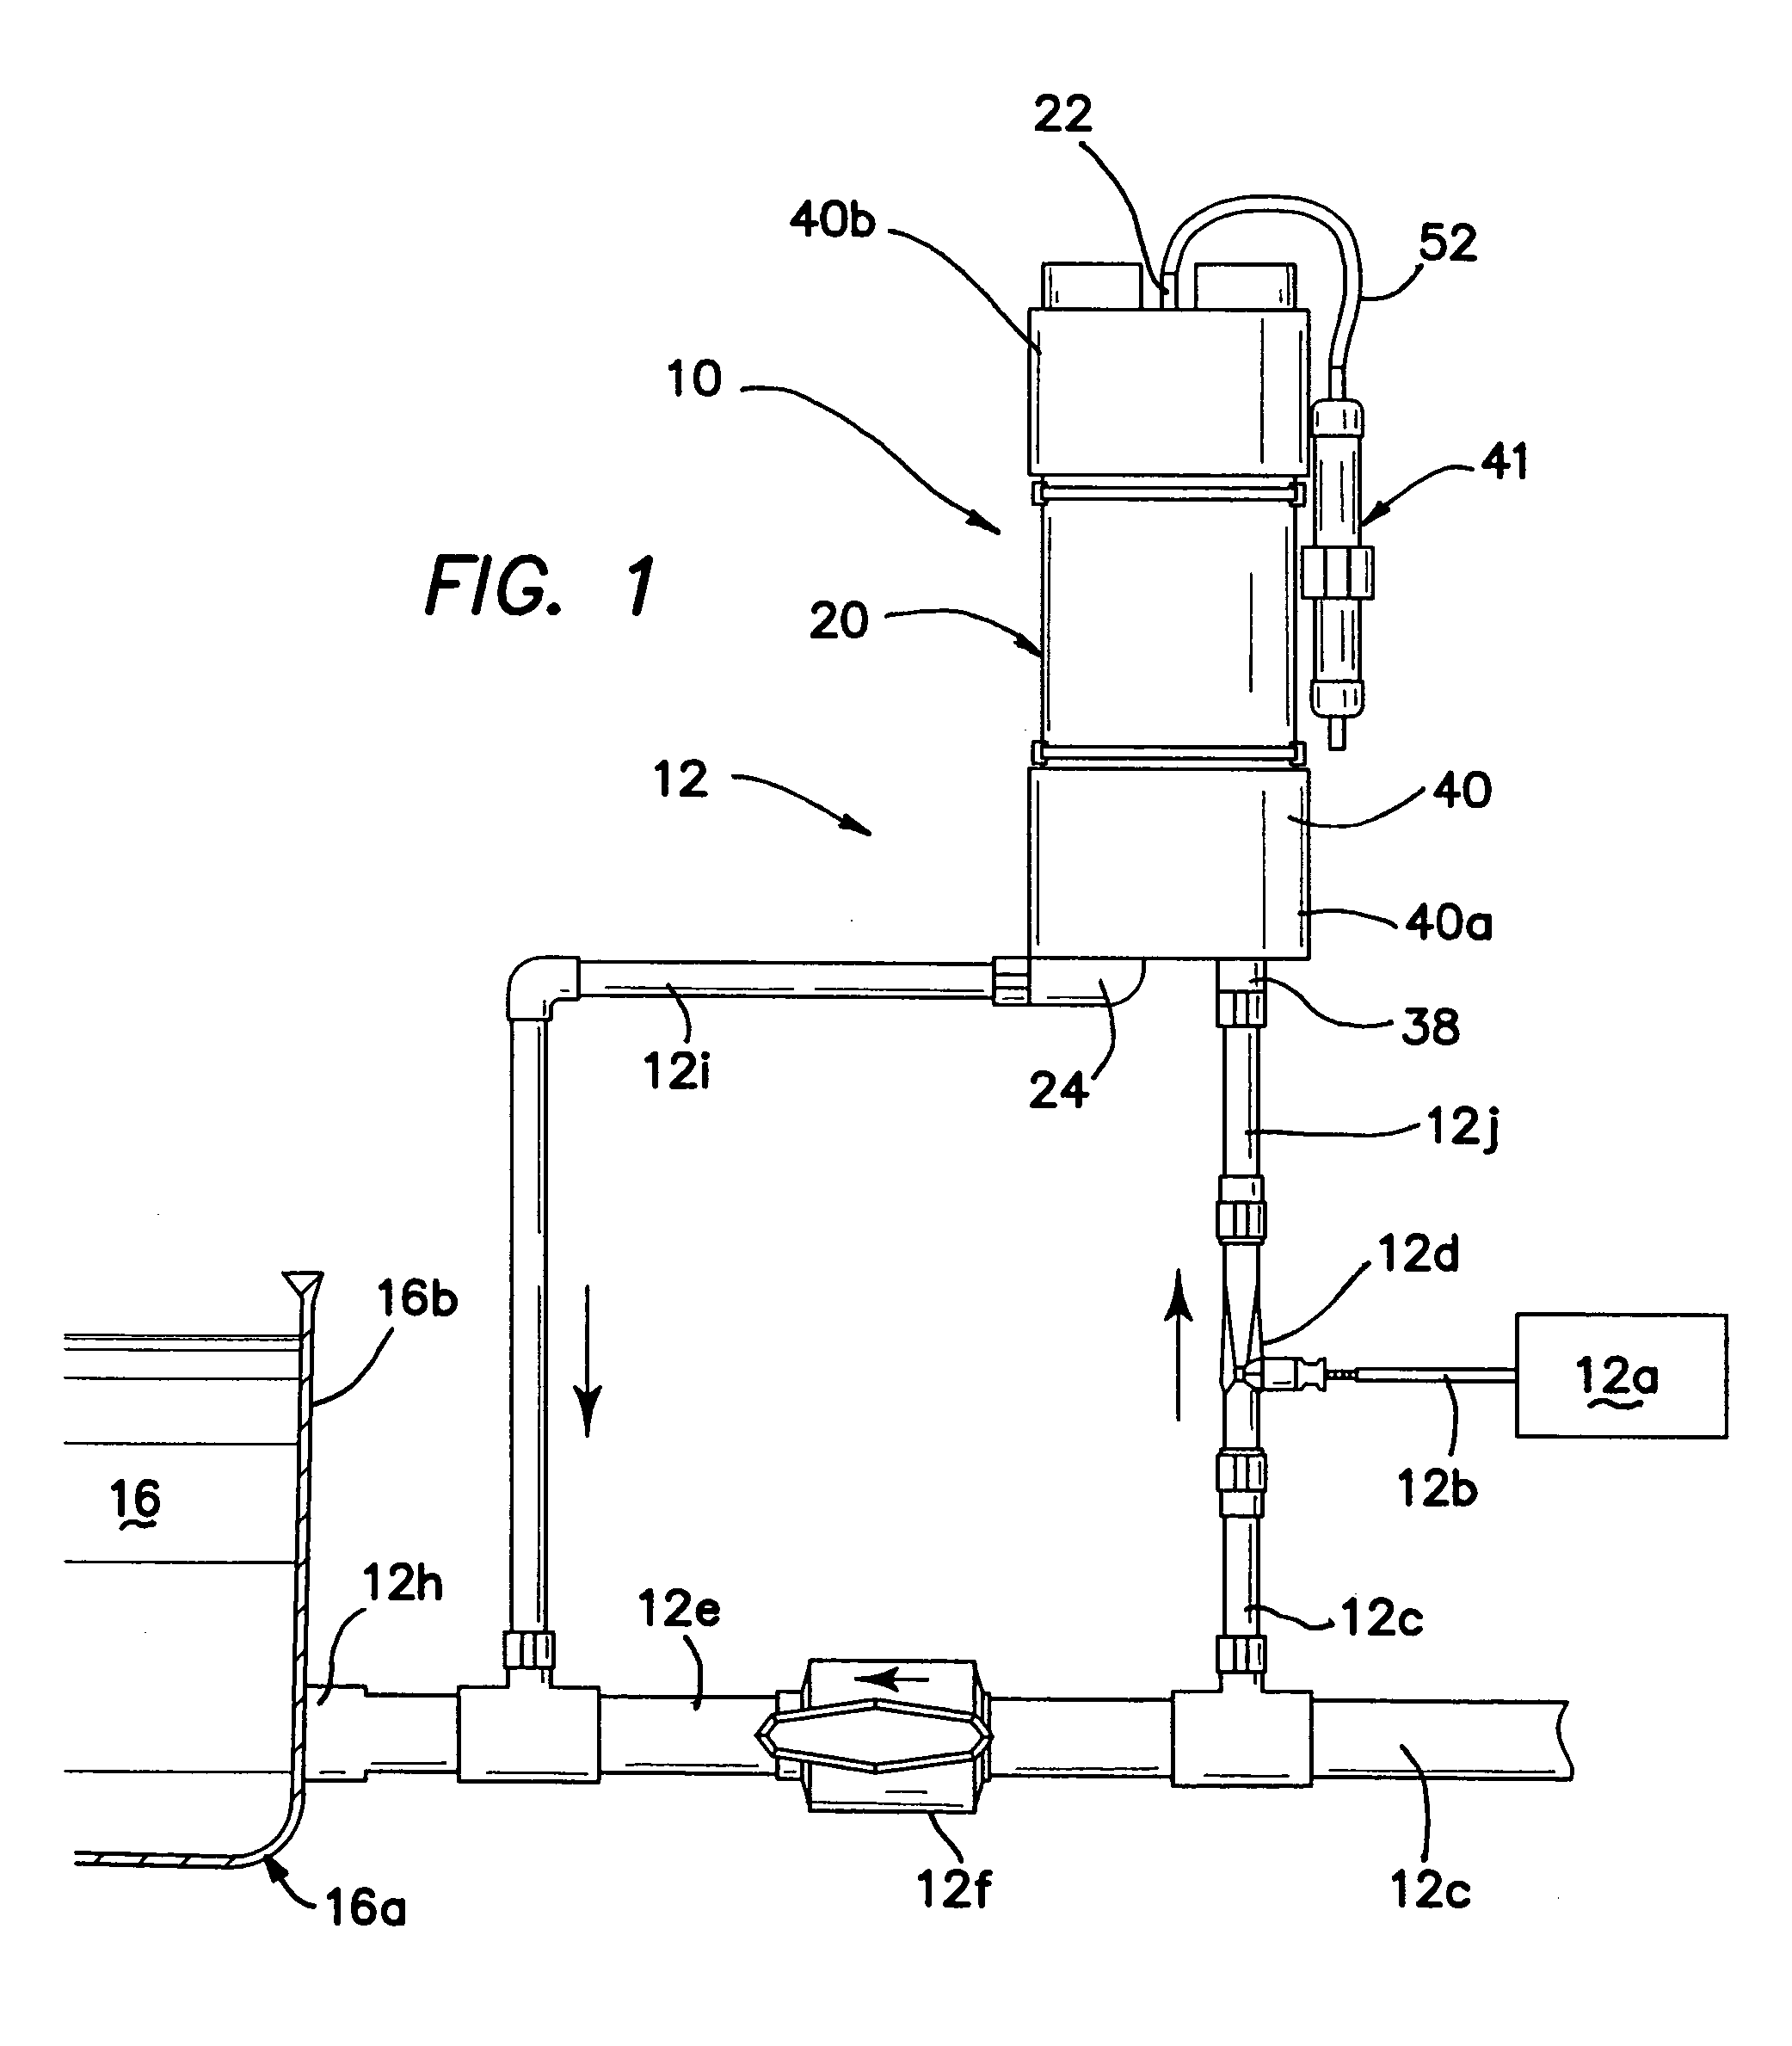 Water ozonation mixing and degassing system